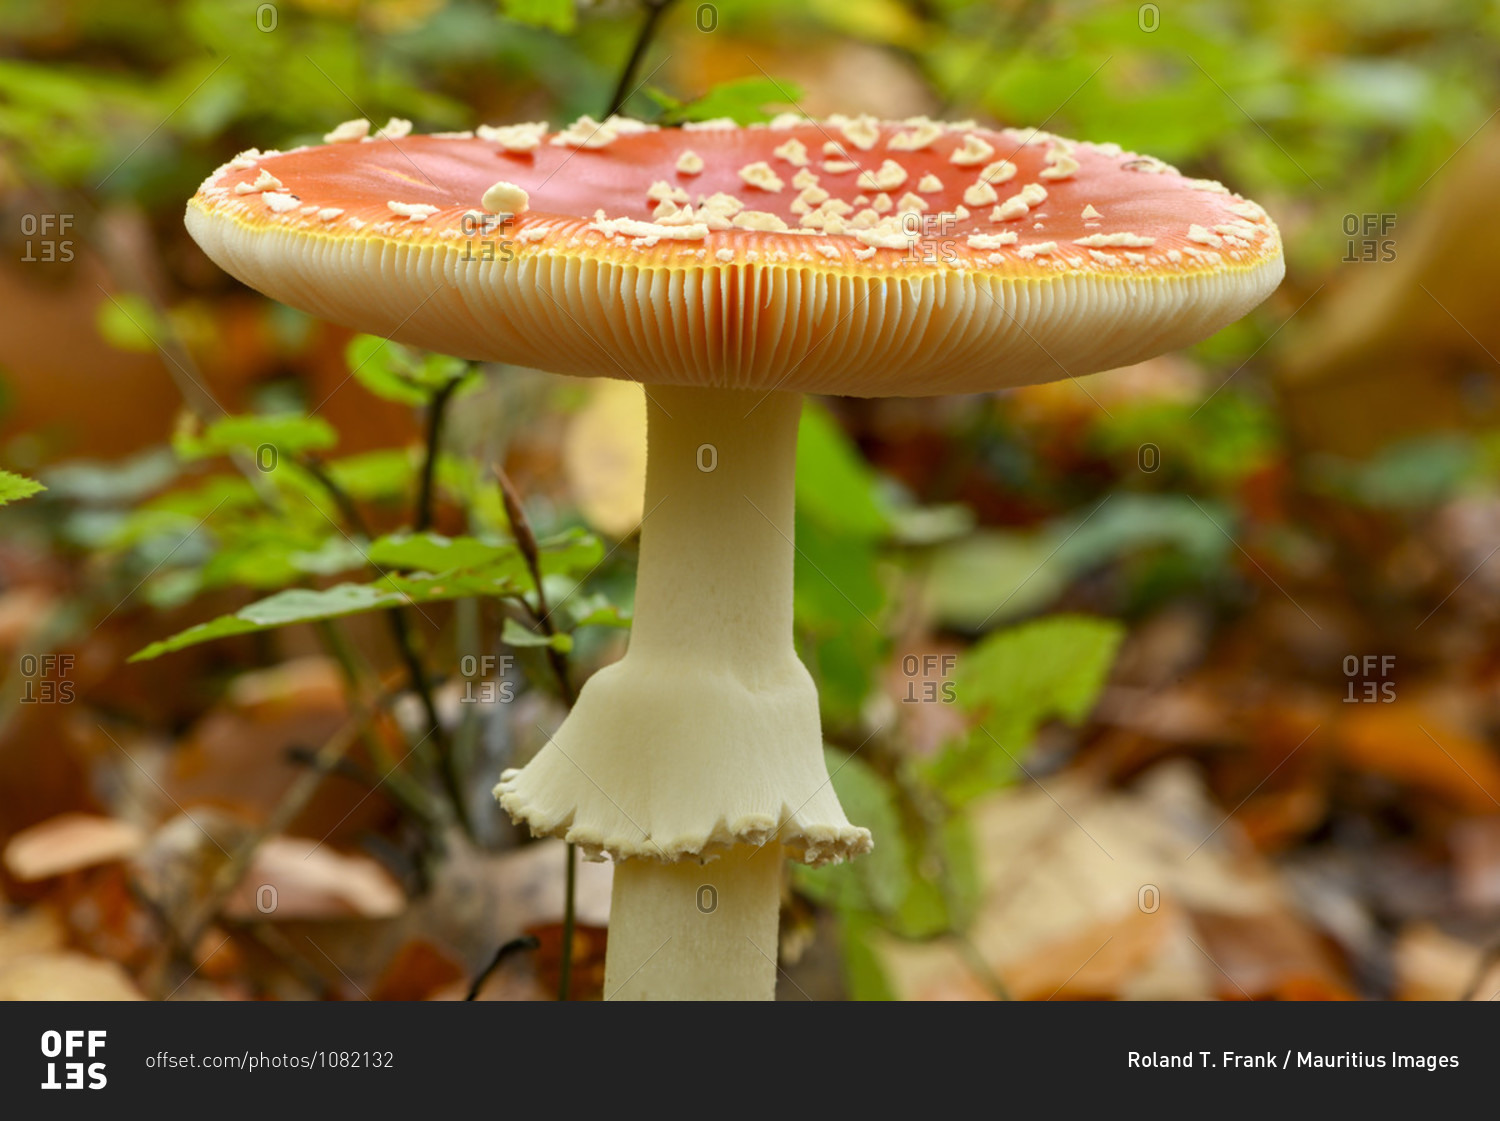 Toadstool (Amanita muscaria), red toadstool, poisonous\
mushroom species. stock photo - OFFSET